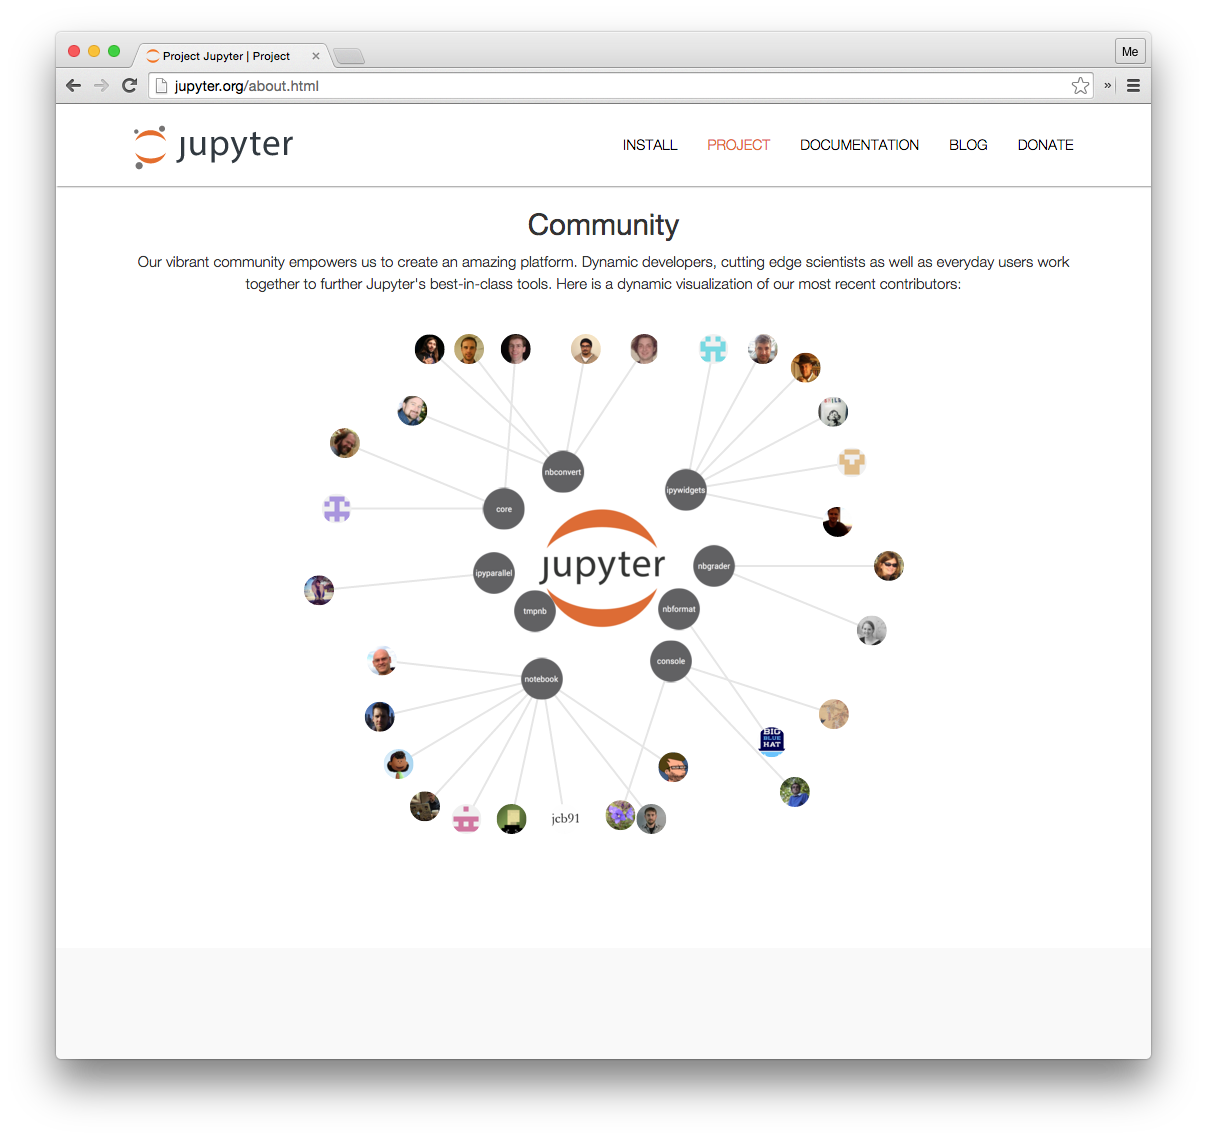 Screenshot of the Jupyter community visualization from the Project Jupyter homepage